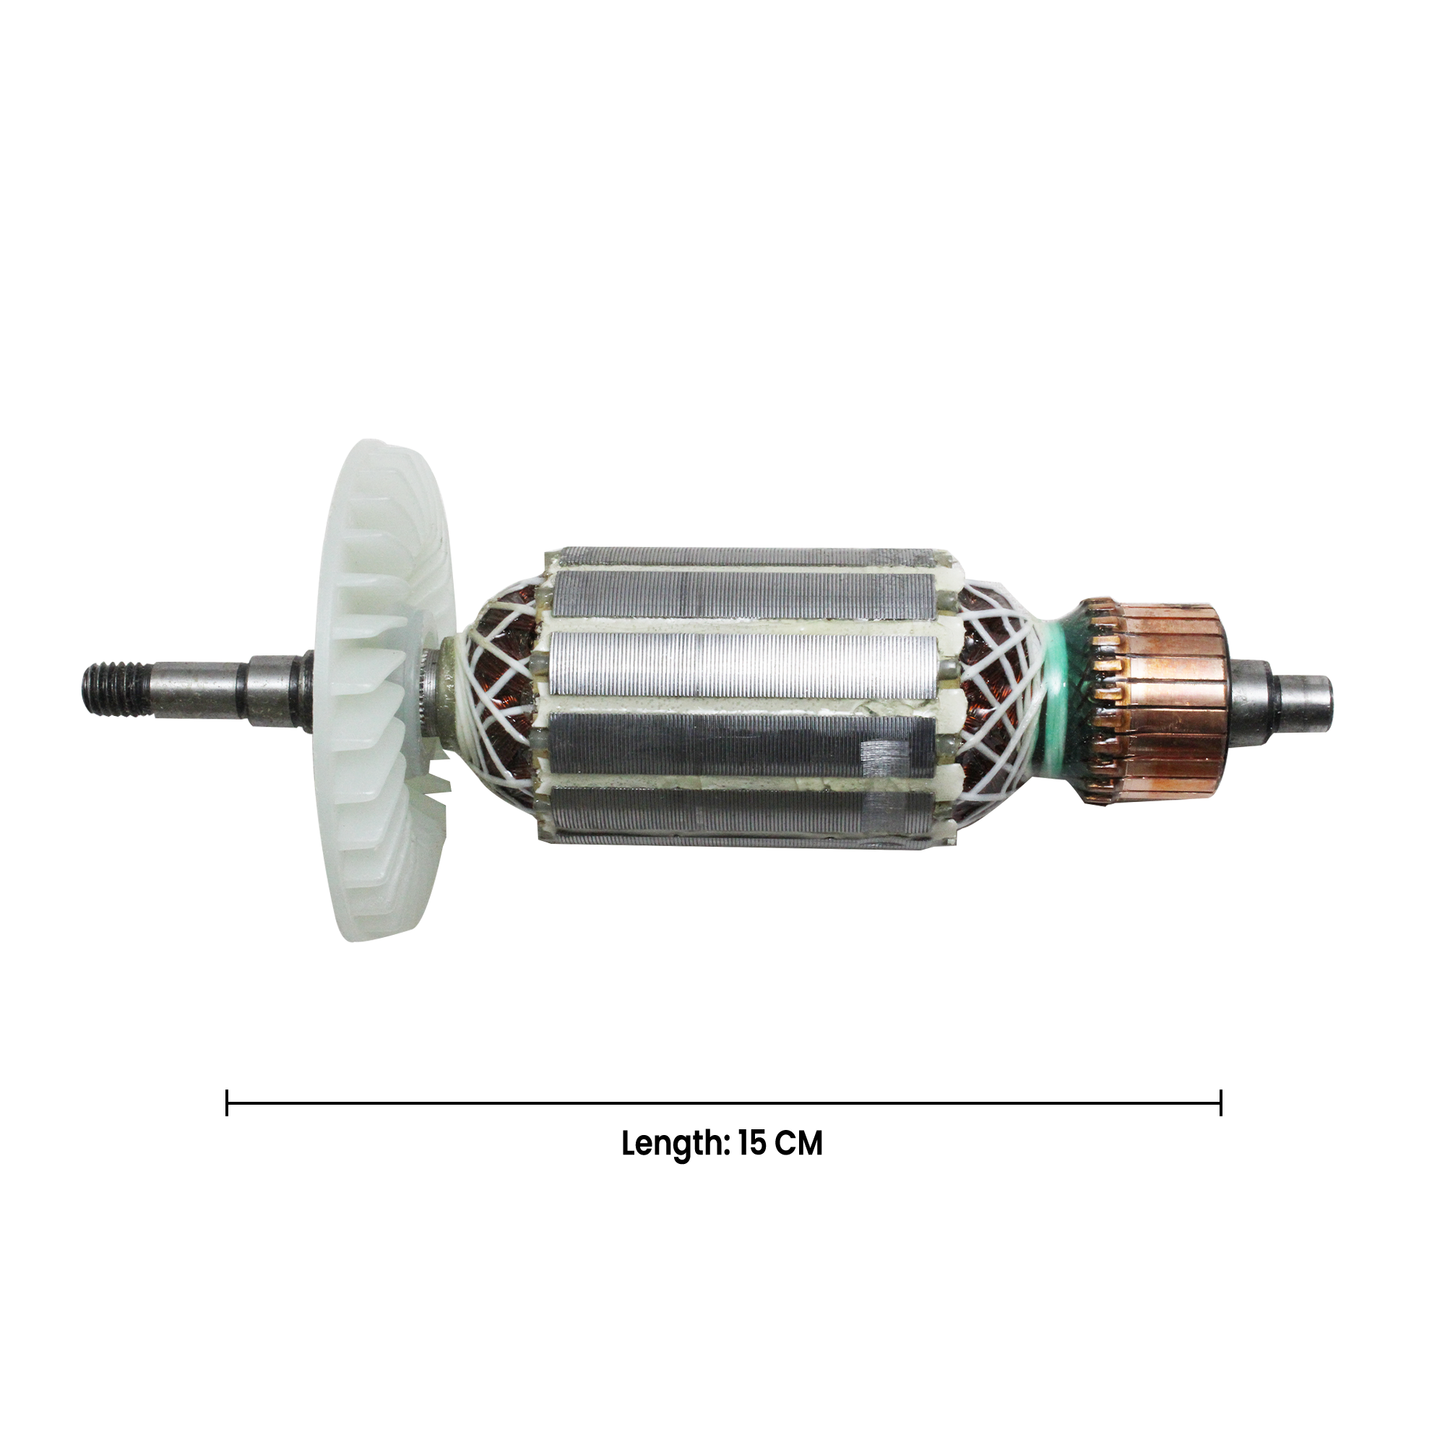 AEGON ACWFCM4SB Copper Armature for 4-Inch Marble Cutter - Suitable for Aegon AC4B